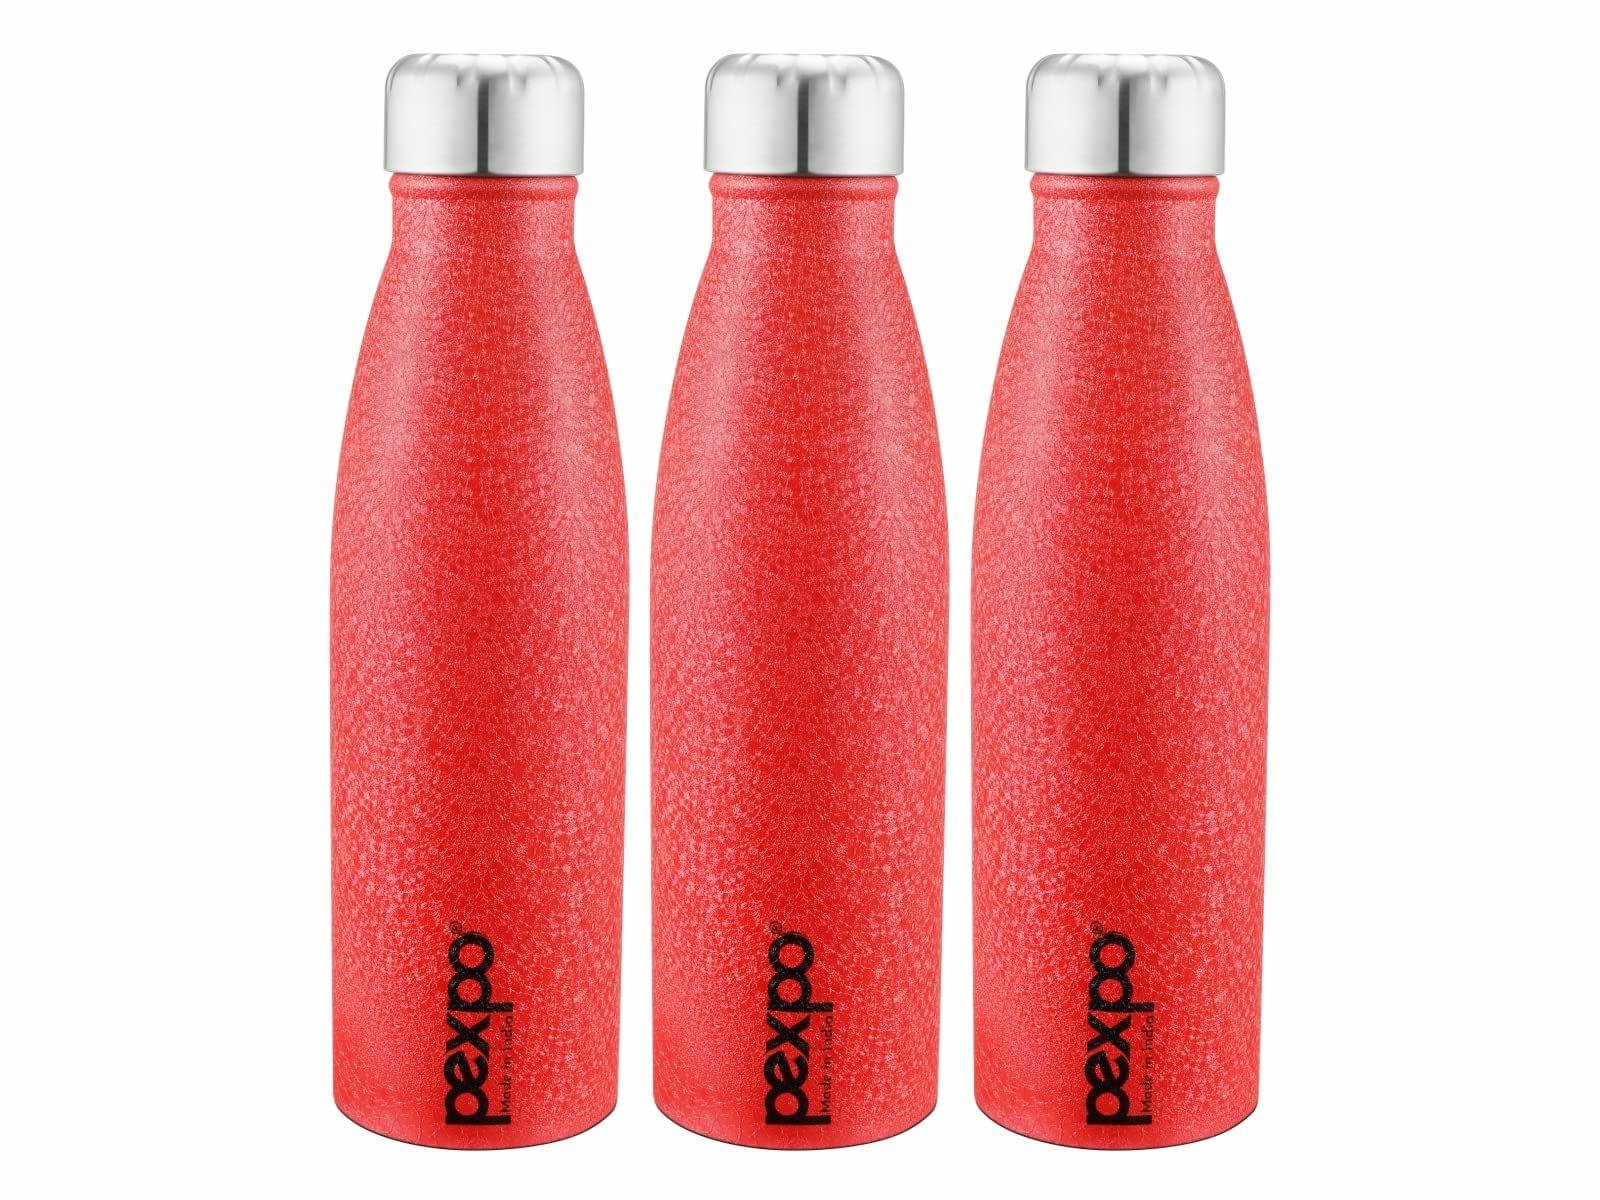 PEXPO Stainless Steel Fridge Water Bottle, 1L, Pack Of 3 Red, Genro | Wide Mouth Water Bottle With a Sturdy Grip